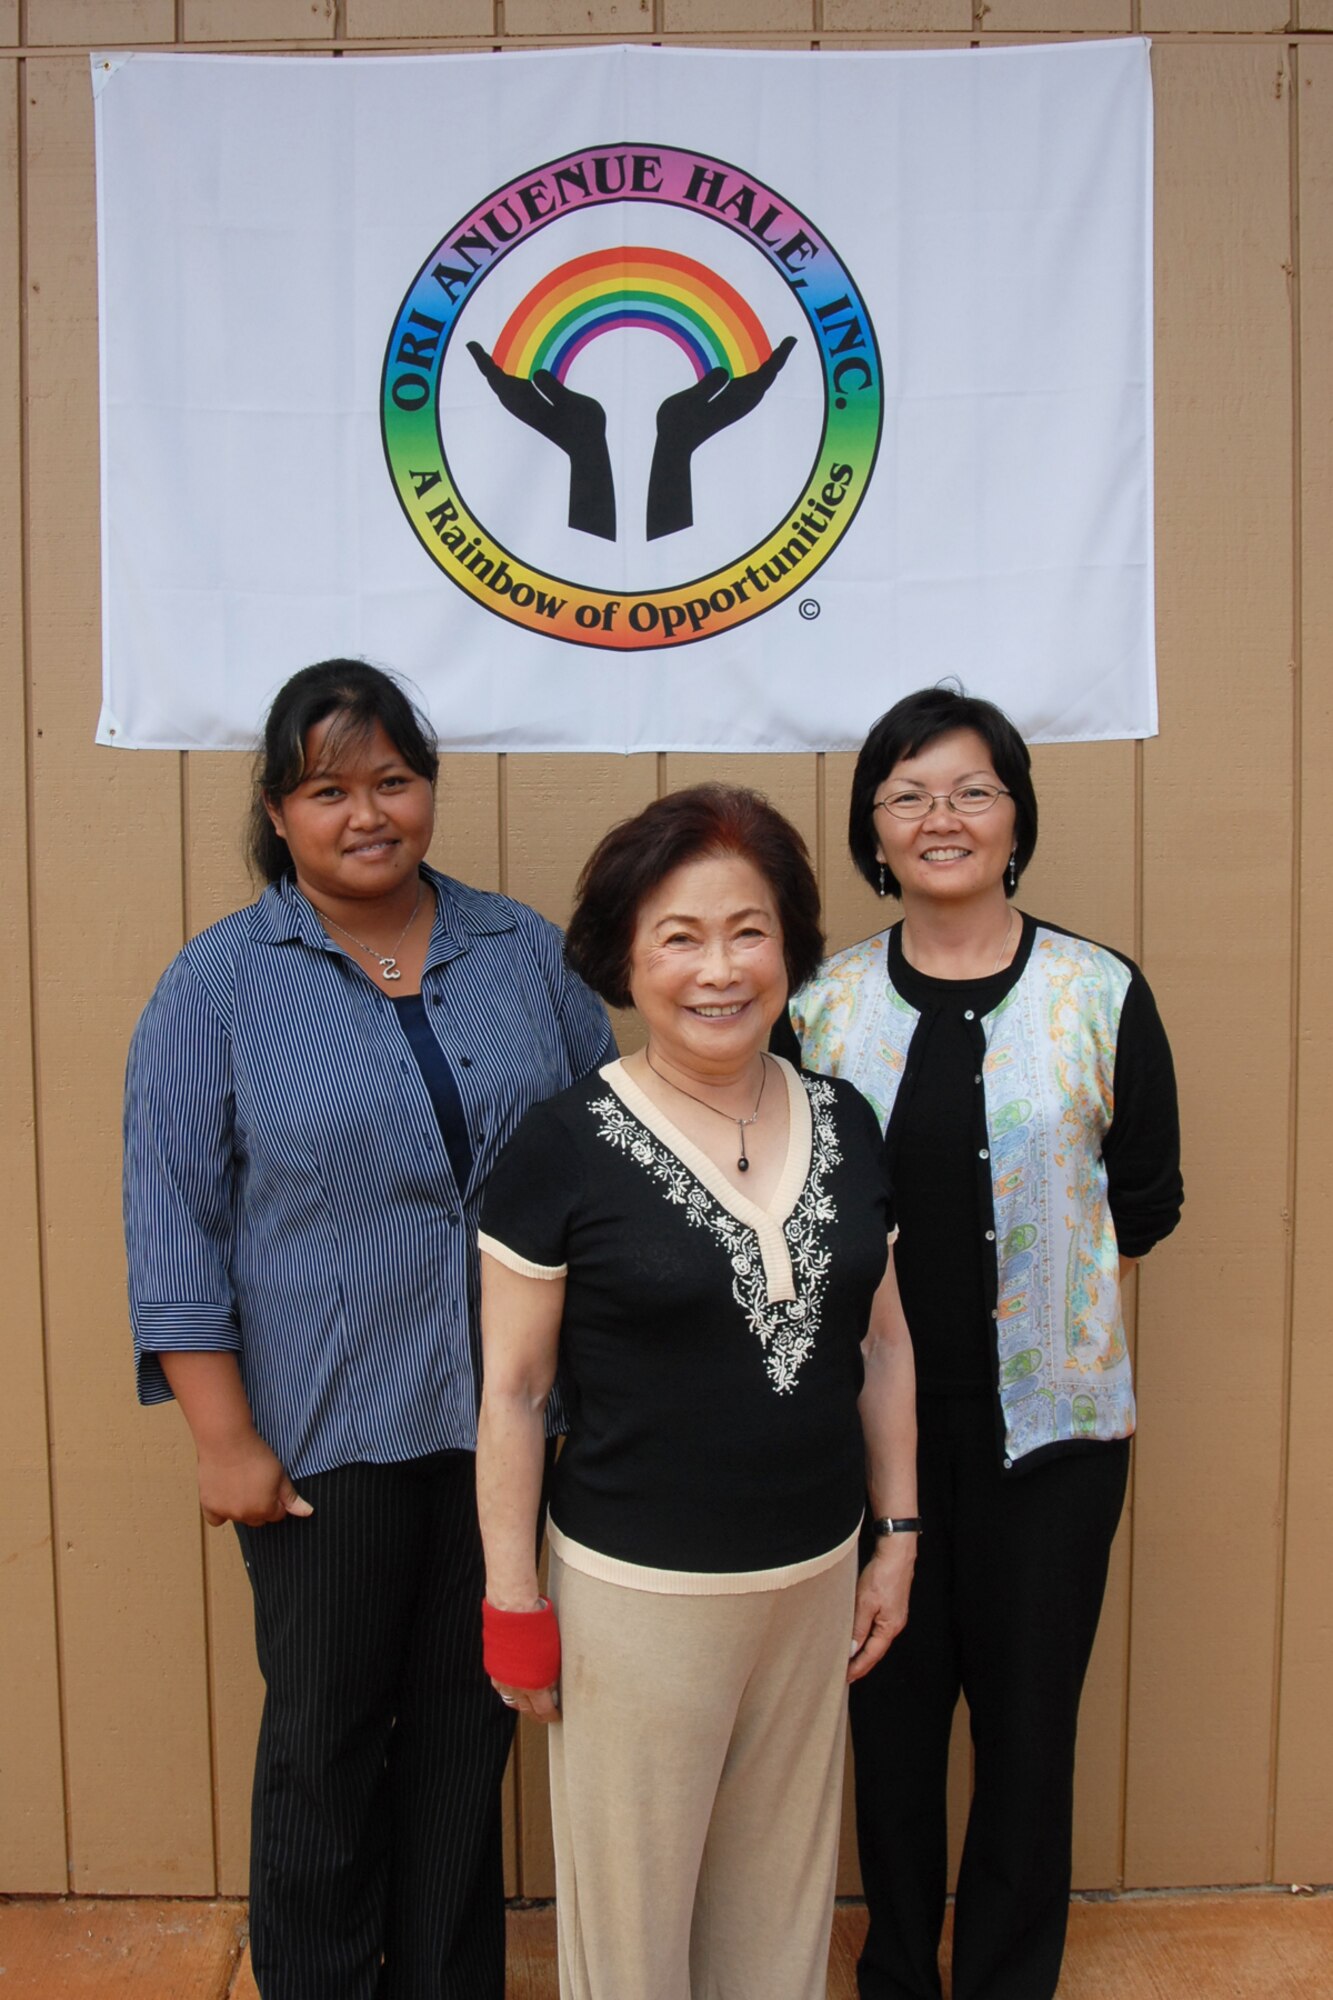 Susanna Cheung (center), president and founder of Opportunities For the Retarded (ORI) Anuenue Hale, stands under her company’s slogan in front of the Helemano Plantation’s Elderly Day Care/Wellness Center with employees May Isnec (left) and Ann Siga (right). The center provides offers several senior citizen services, including medical assistance, yoga classes, computer lessons, and other helpful amenities and activities. (USAF photo by SrA. Anna-Marie Wyant